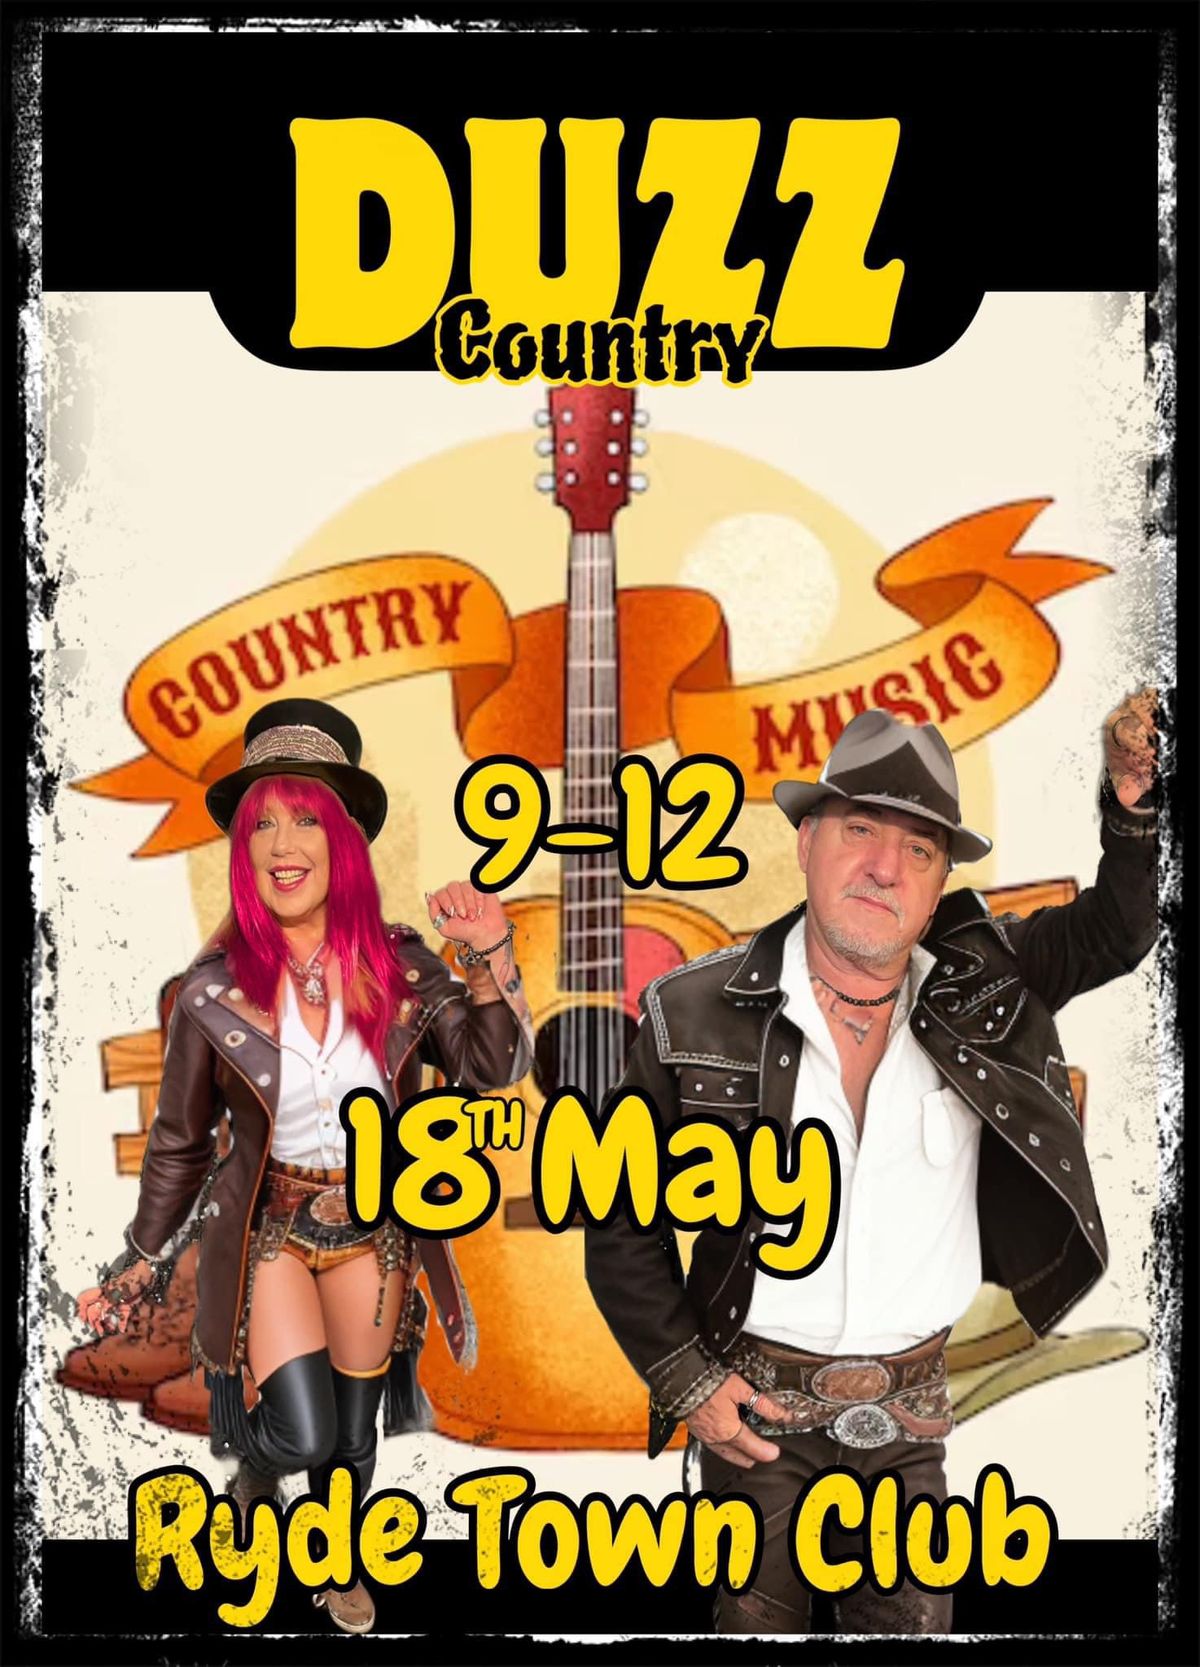 DUZZ Country at Ryde Town Club